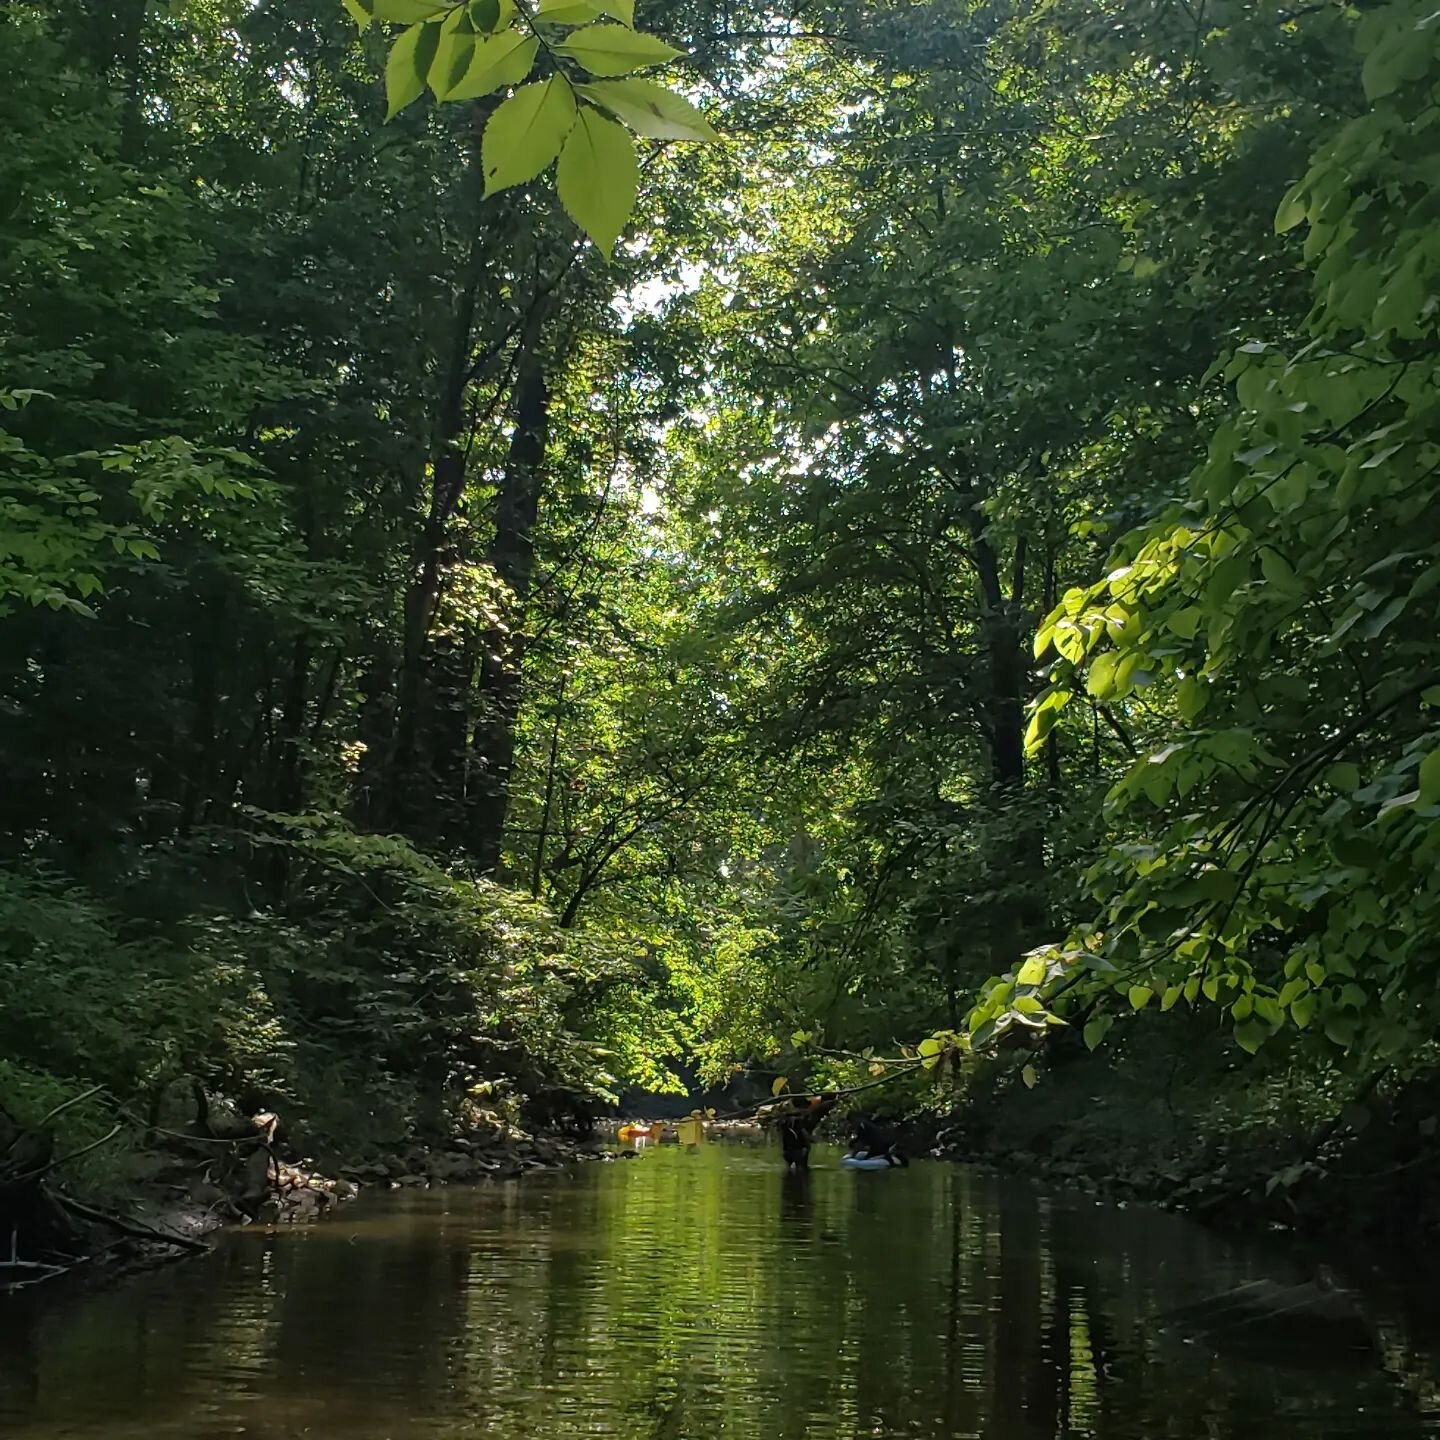 Back at our happy place. I sat my chair right in the middle of the creek and  caught up on a class and client notes while the boys caught big crawdads, dug in the mud, and floated up the creek. This creek makes us better.